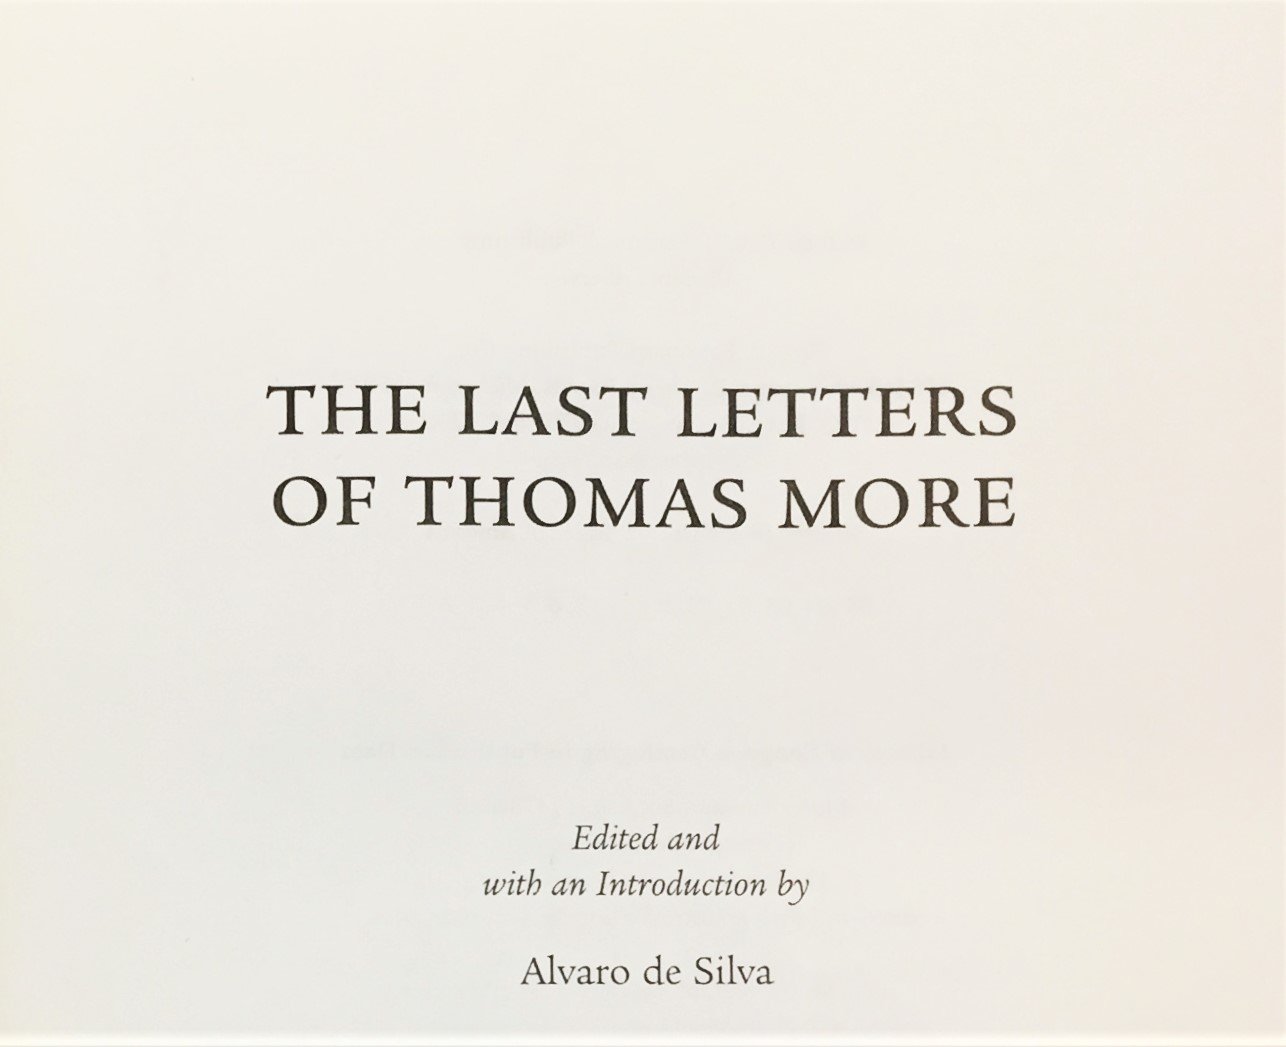 Cover page with capitalized serif text: "The Last Letters of Thomas More"